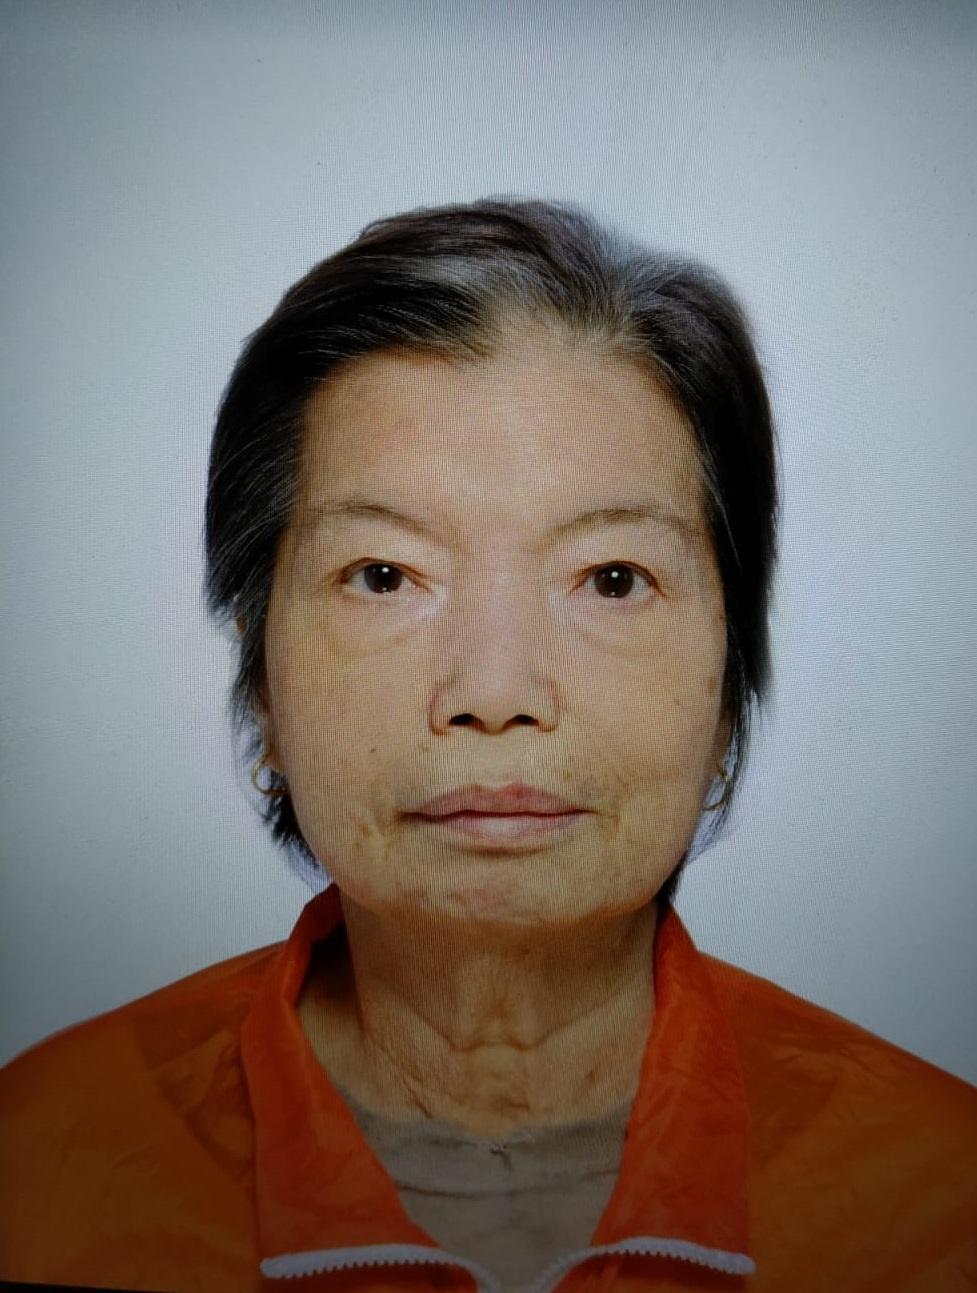 Tse Kwan-fong, aged 72, is about 1.54 metres tall, 72 kilograms in weight and of fat build. She has a round face with yellow complexion and short straight black hair. She was last seen wearing a dark blue sweater, grey trousers, grey socks, blue slippers, and her right arm was wrapped in a plaster cast.